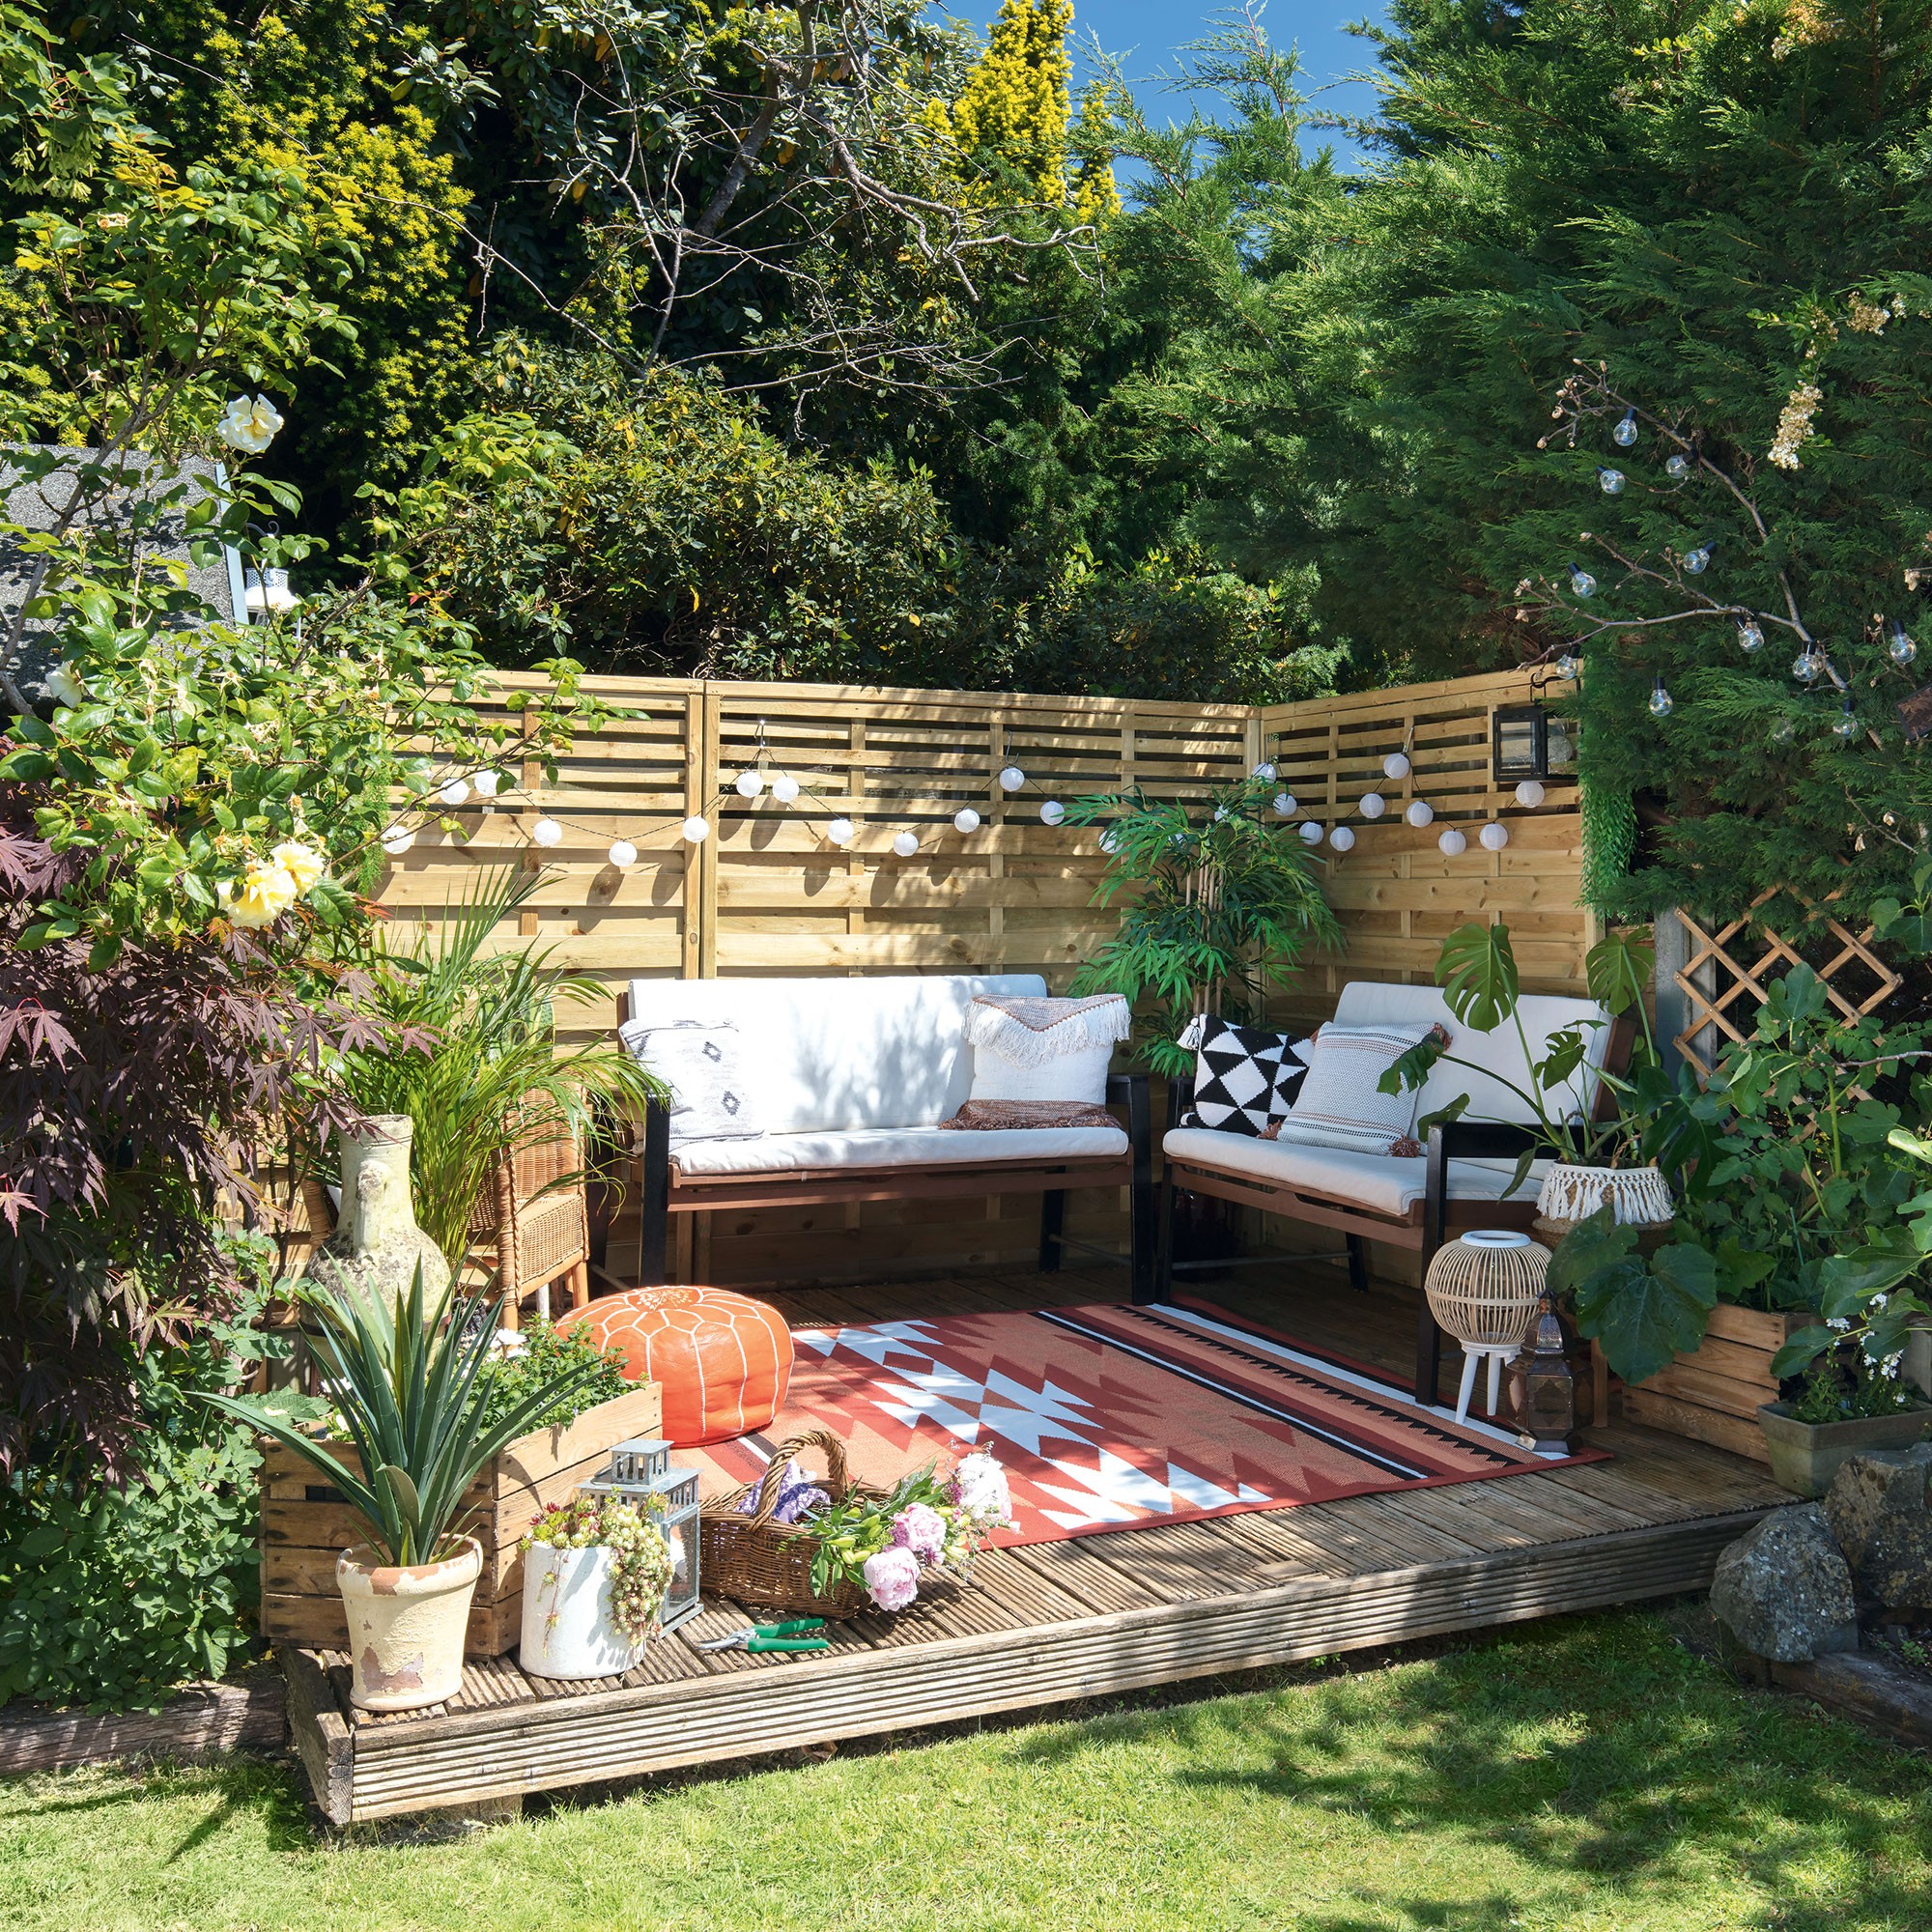 raised decking area in corner of garden with two sofas, patterned rug and potted plants